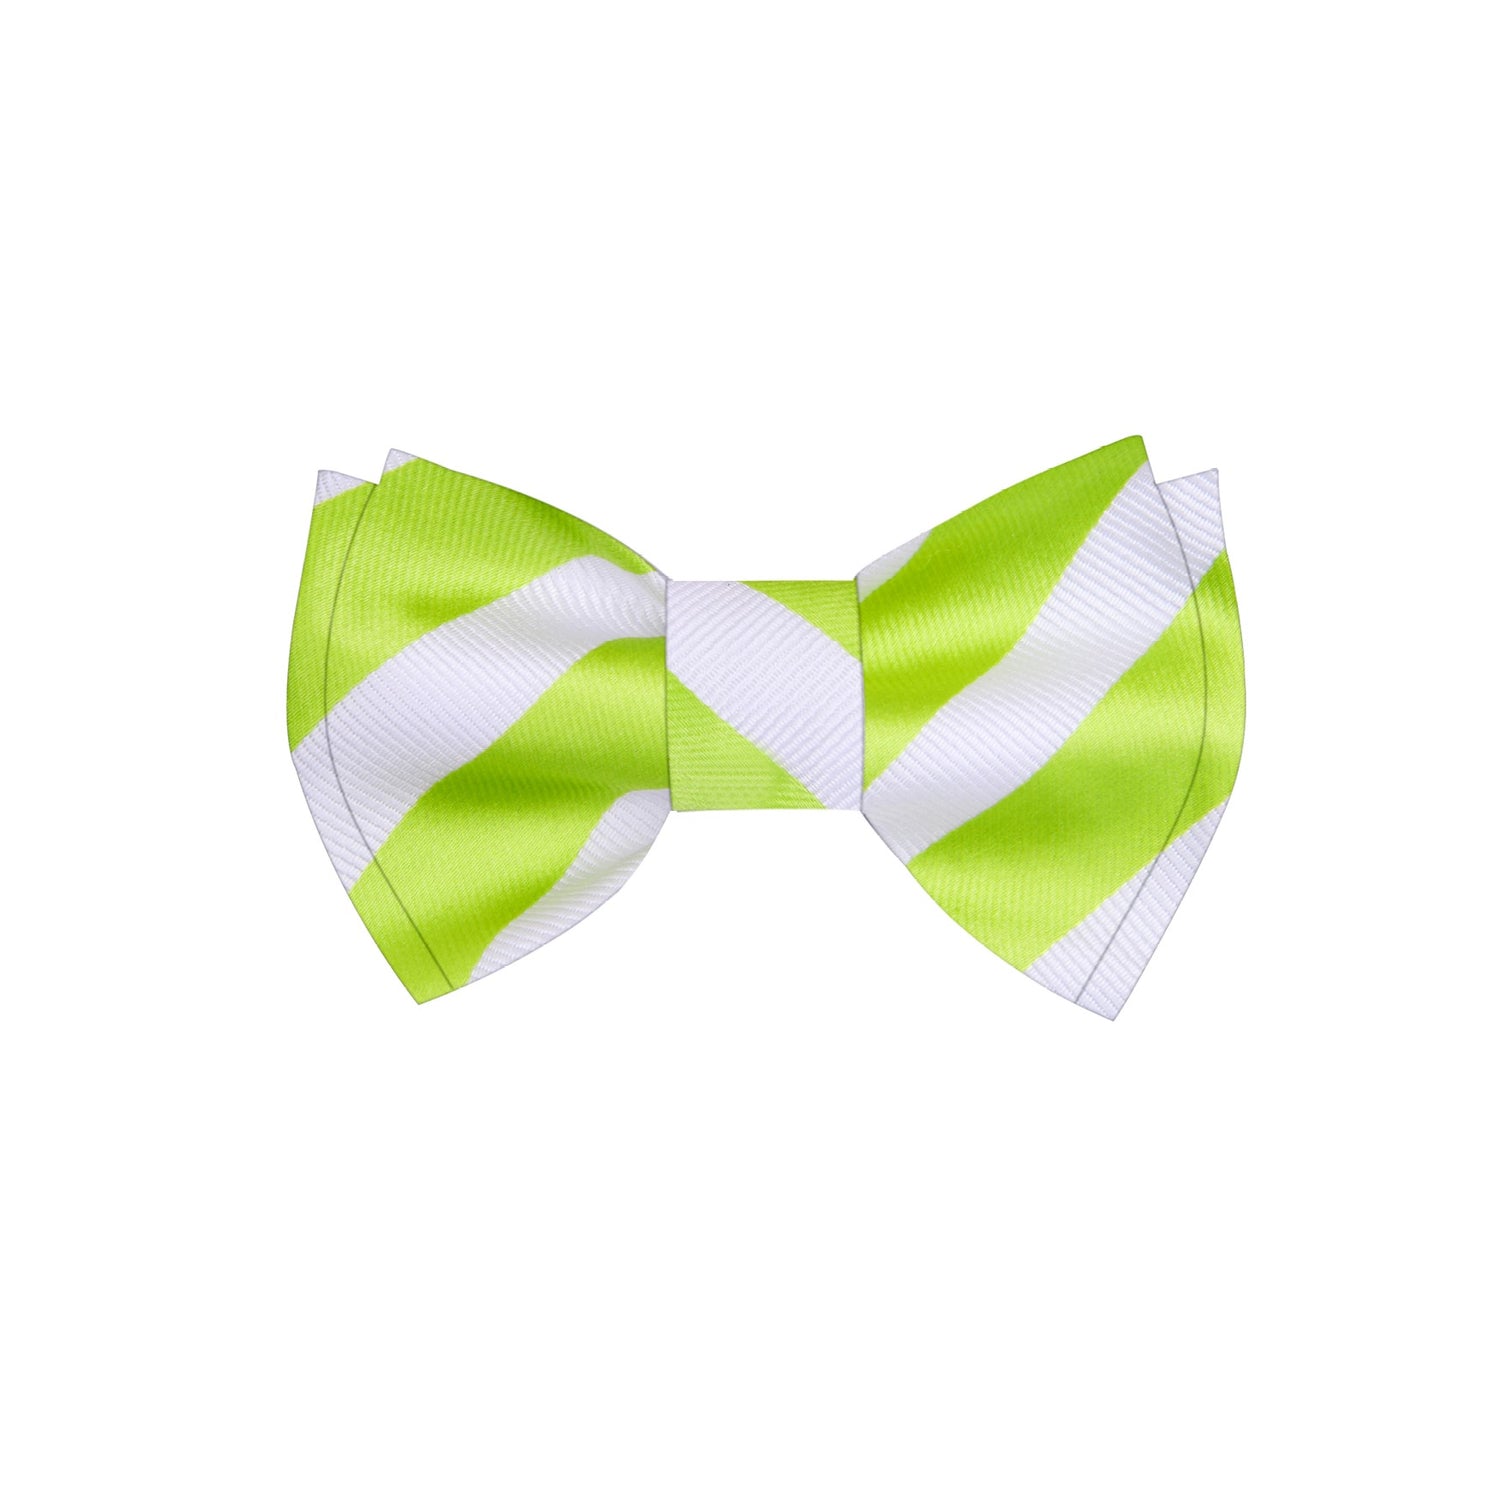 A White, Lime Green Stripe Pattern Silk Self Tie Bow Tie, Matching Pocket Square